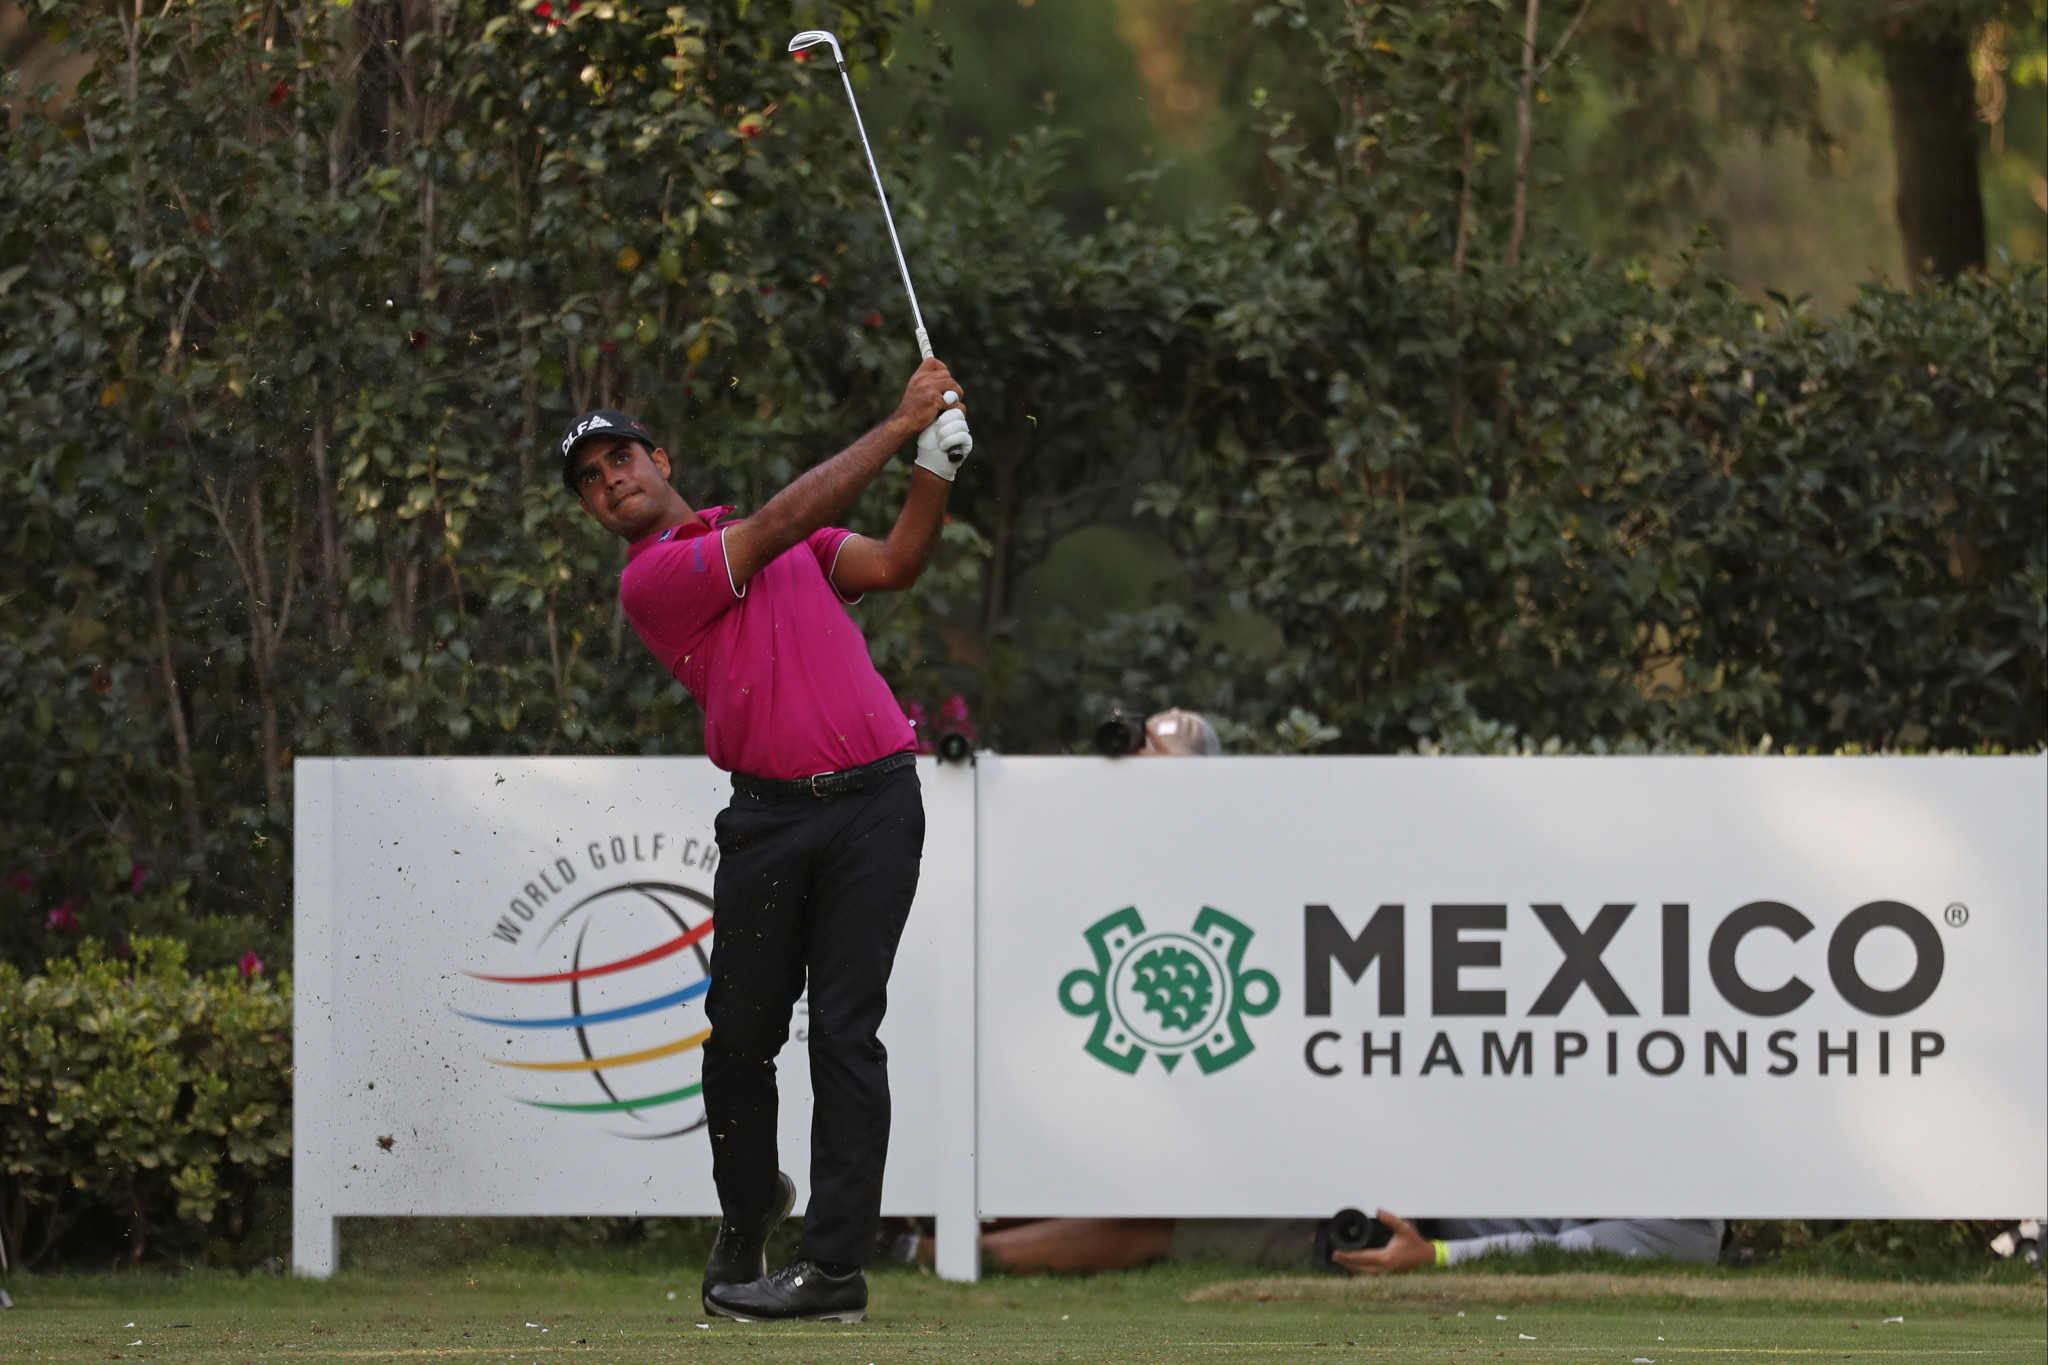 India's Shubhankar Sharma held on to his two-shot lead at the World Golf Championship ©Getty Images